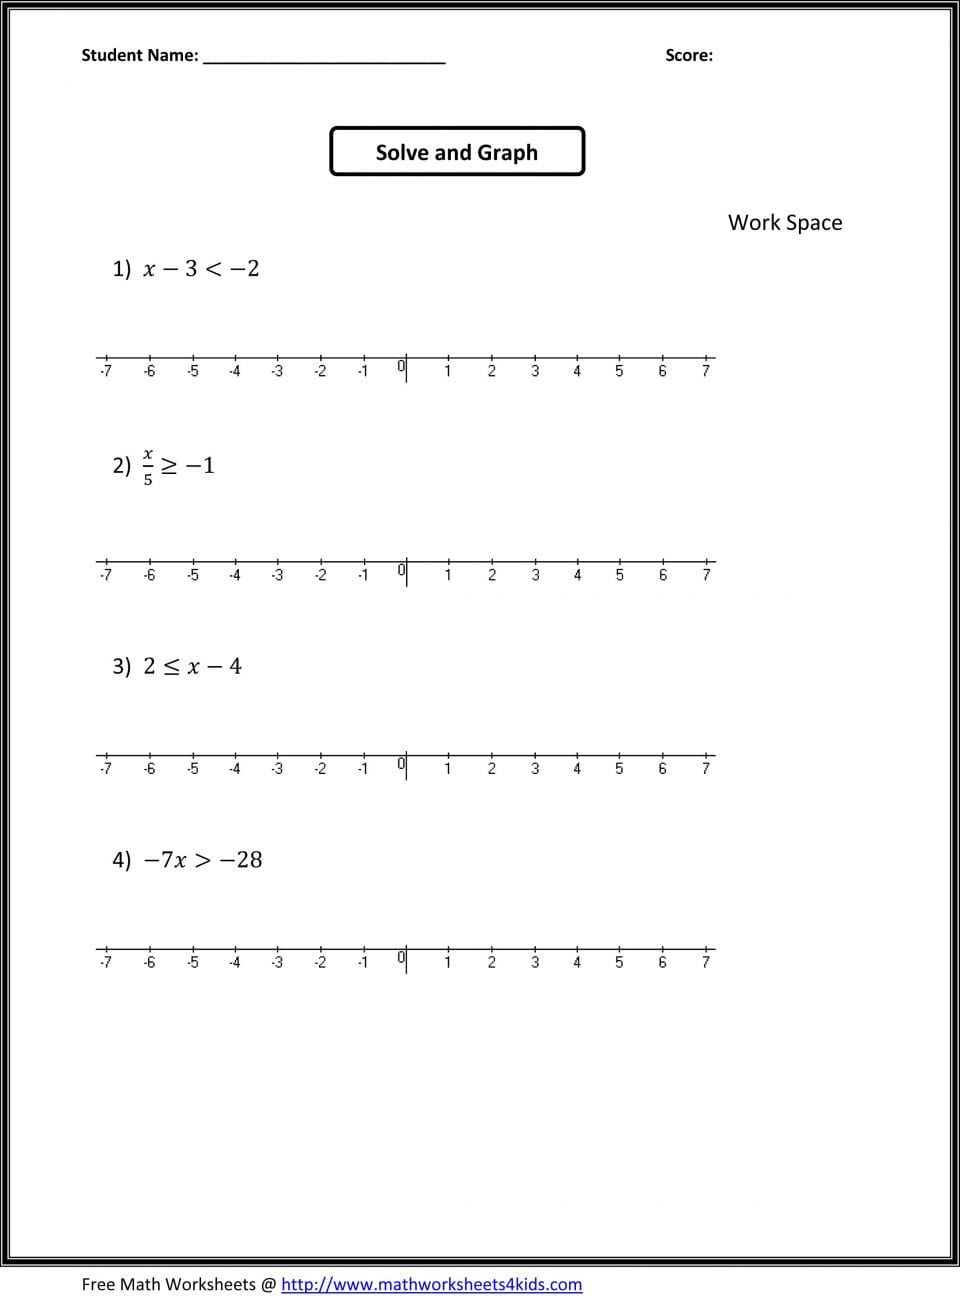 7th-grade-math-worksheets-and-answer-key-db-excel